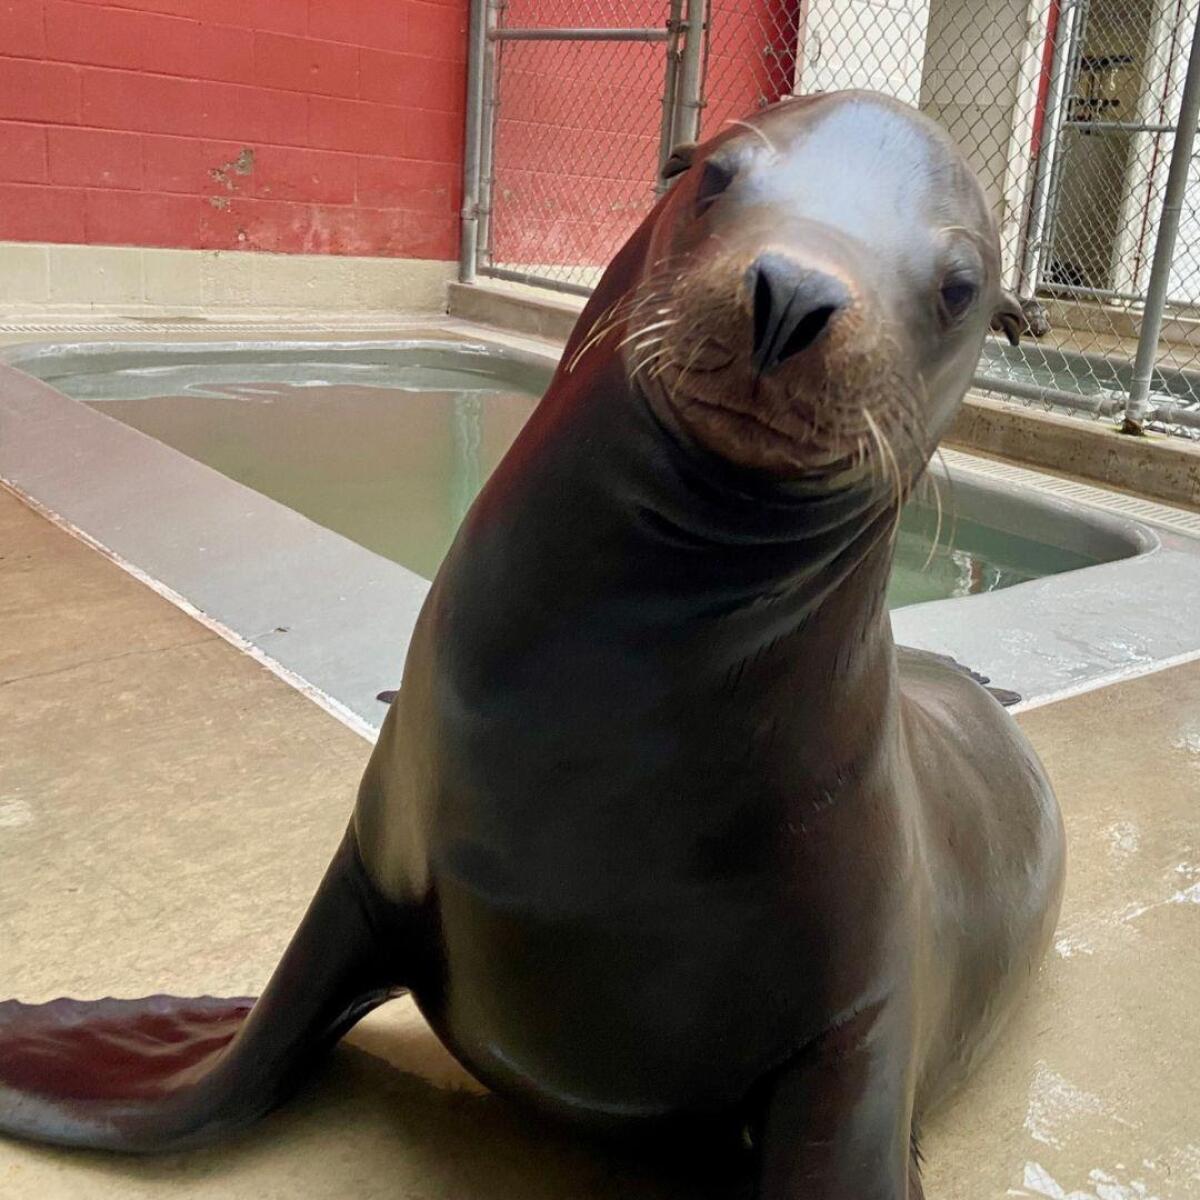 A sea lion in the care of the Pacific Marine Mammal Center.